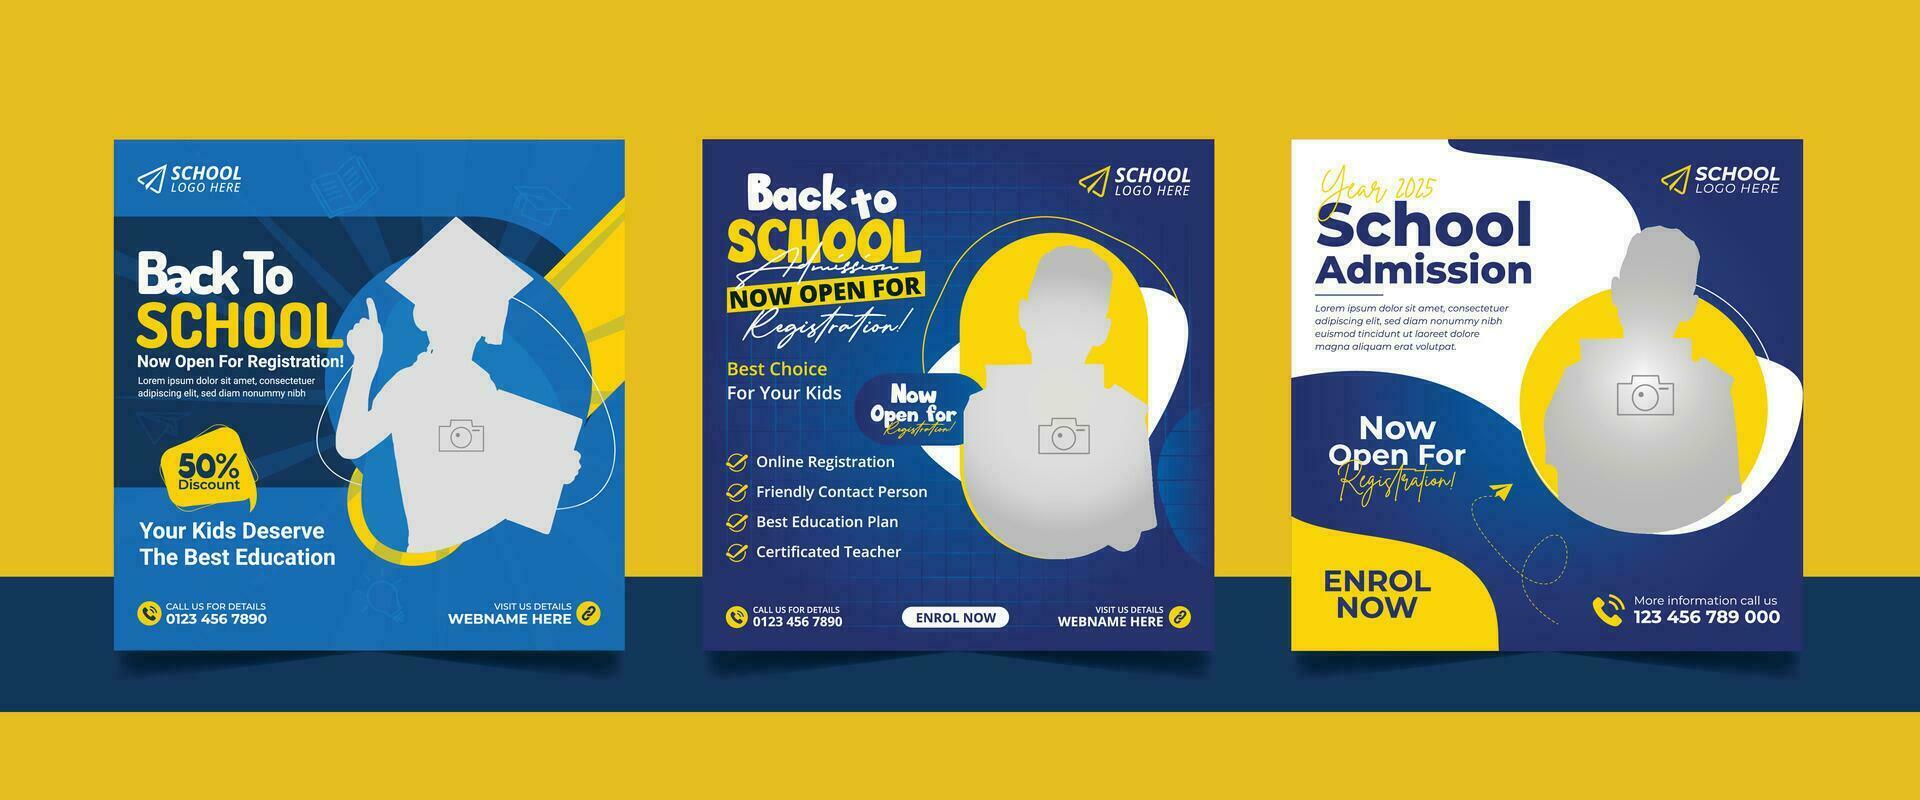 Back to school admission social media post banner educational square flyer study abroad web banner design template vector